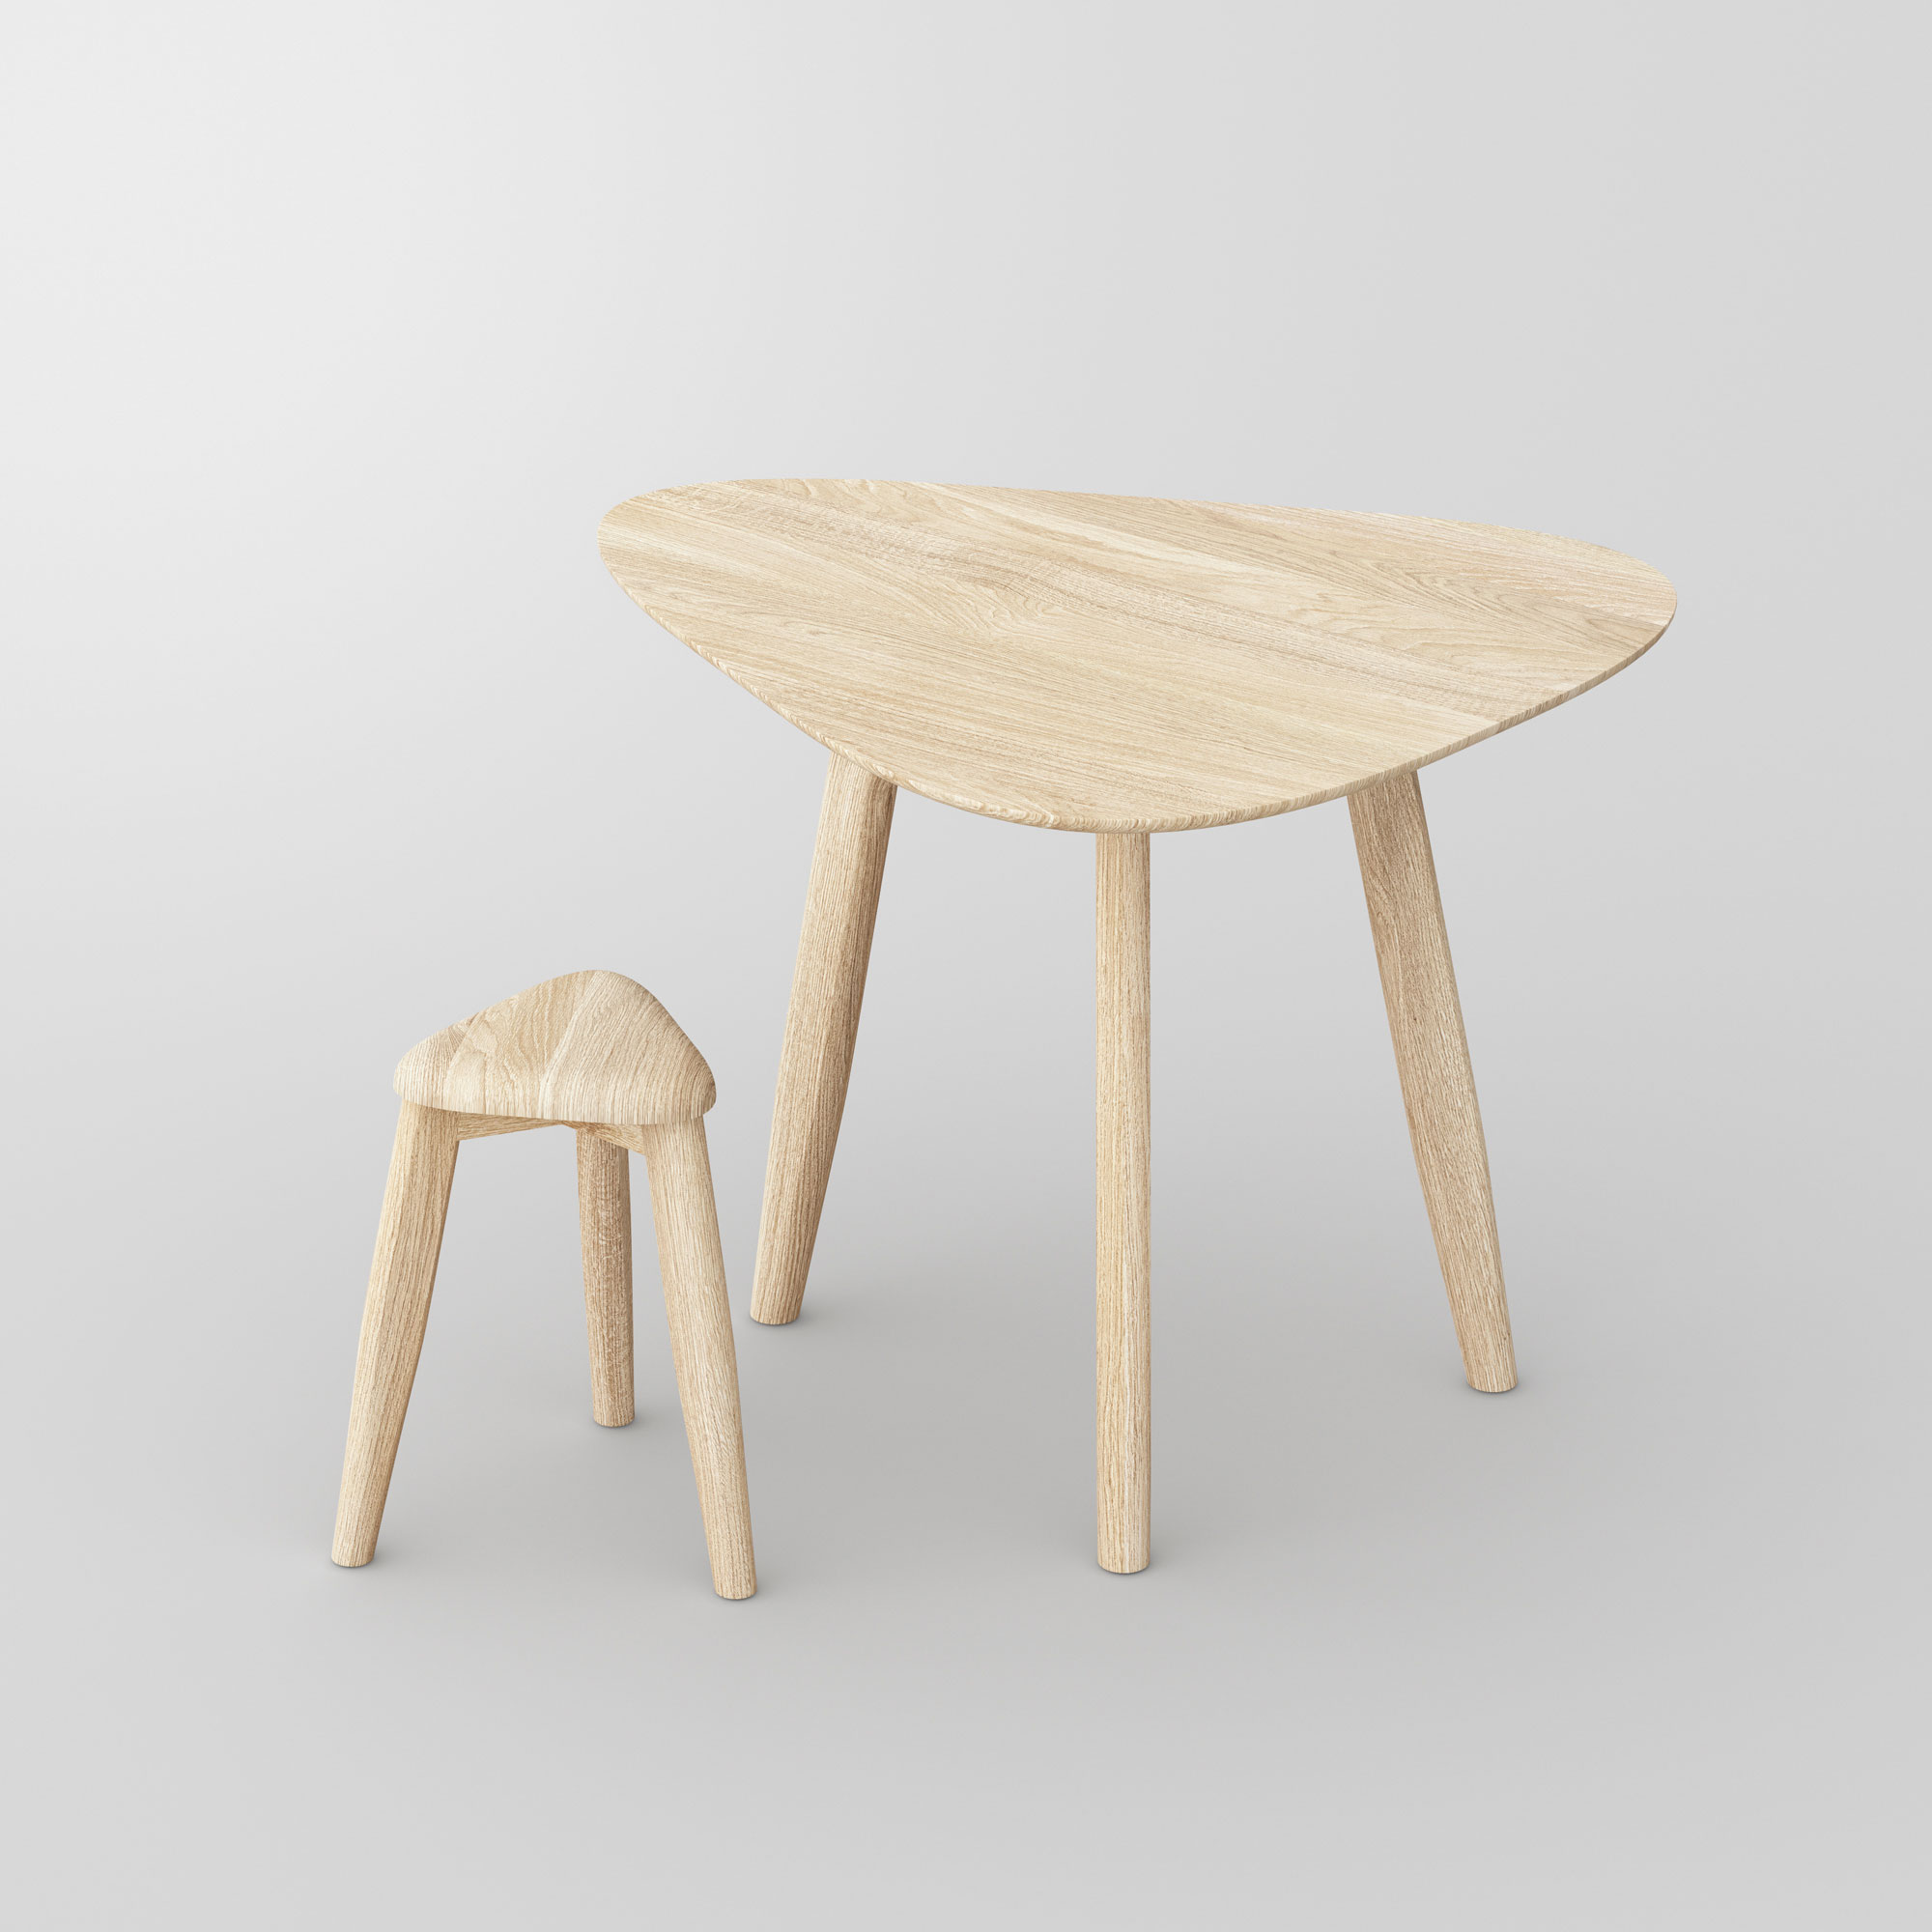 Triangle Wood Stool AETAS SPACE vitamin-design custom made in solid wood by vitamin design